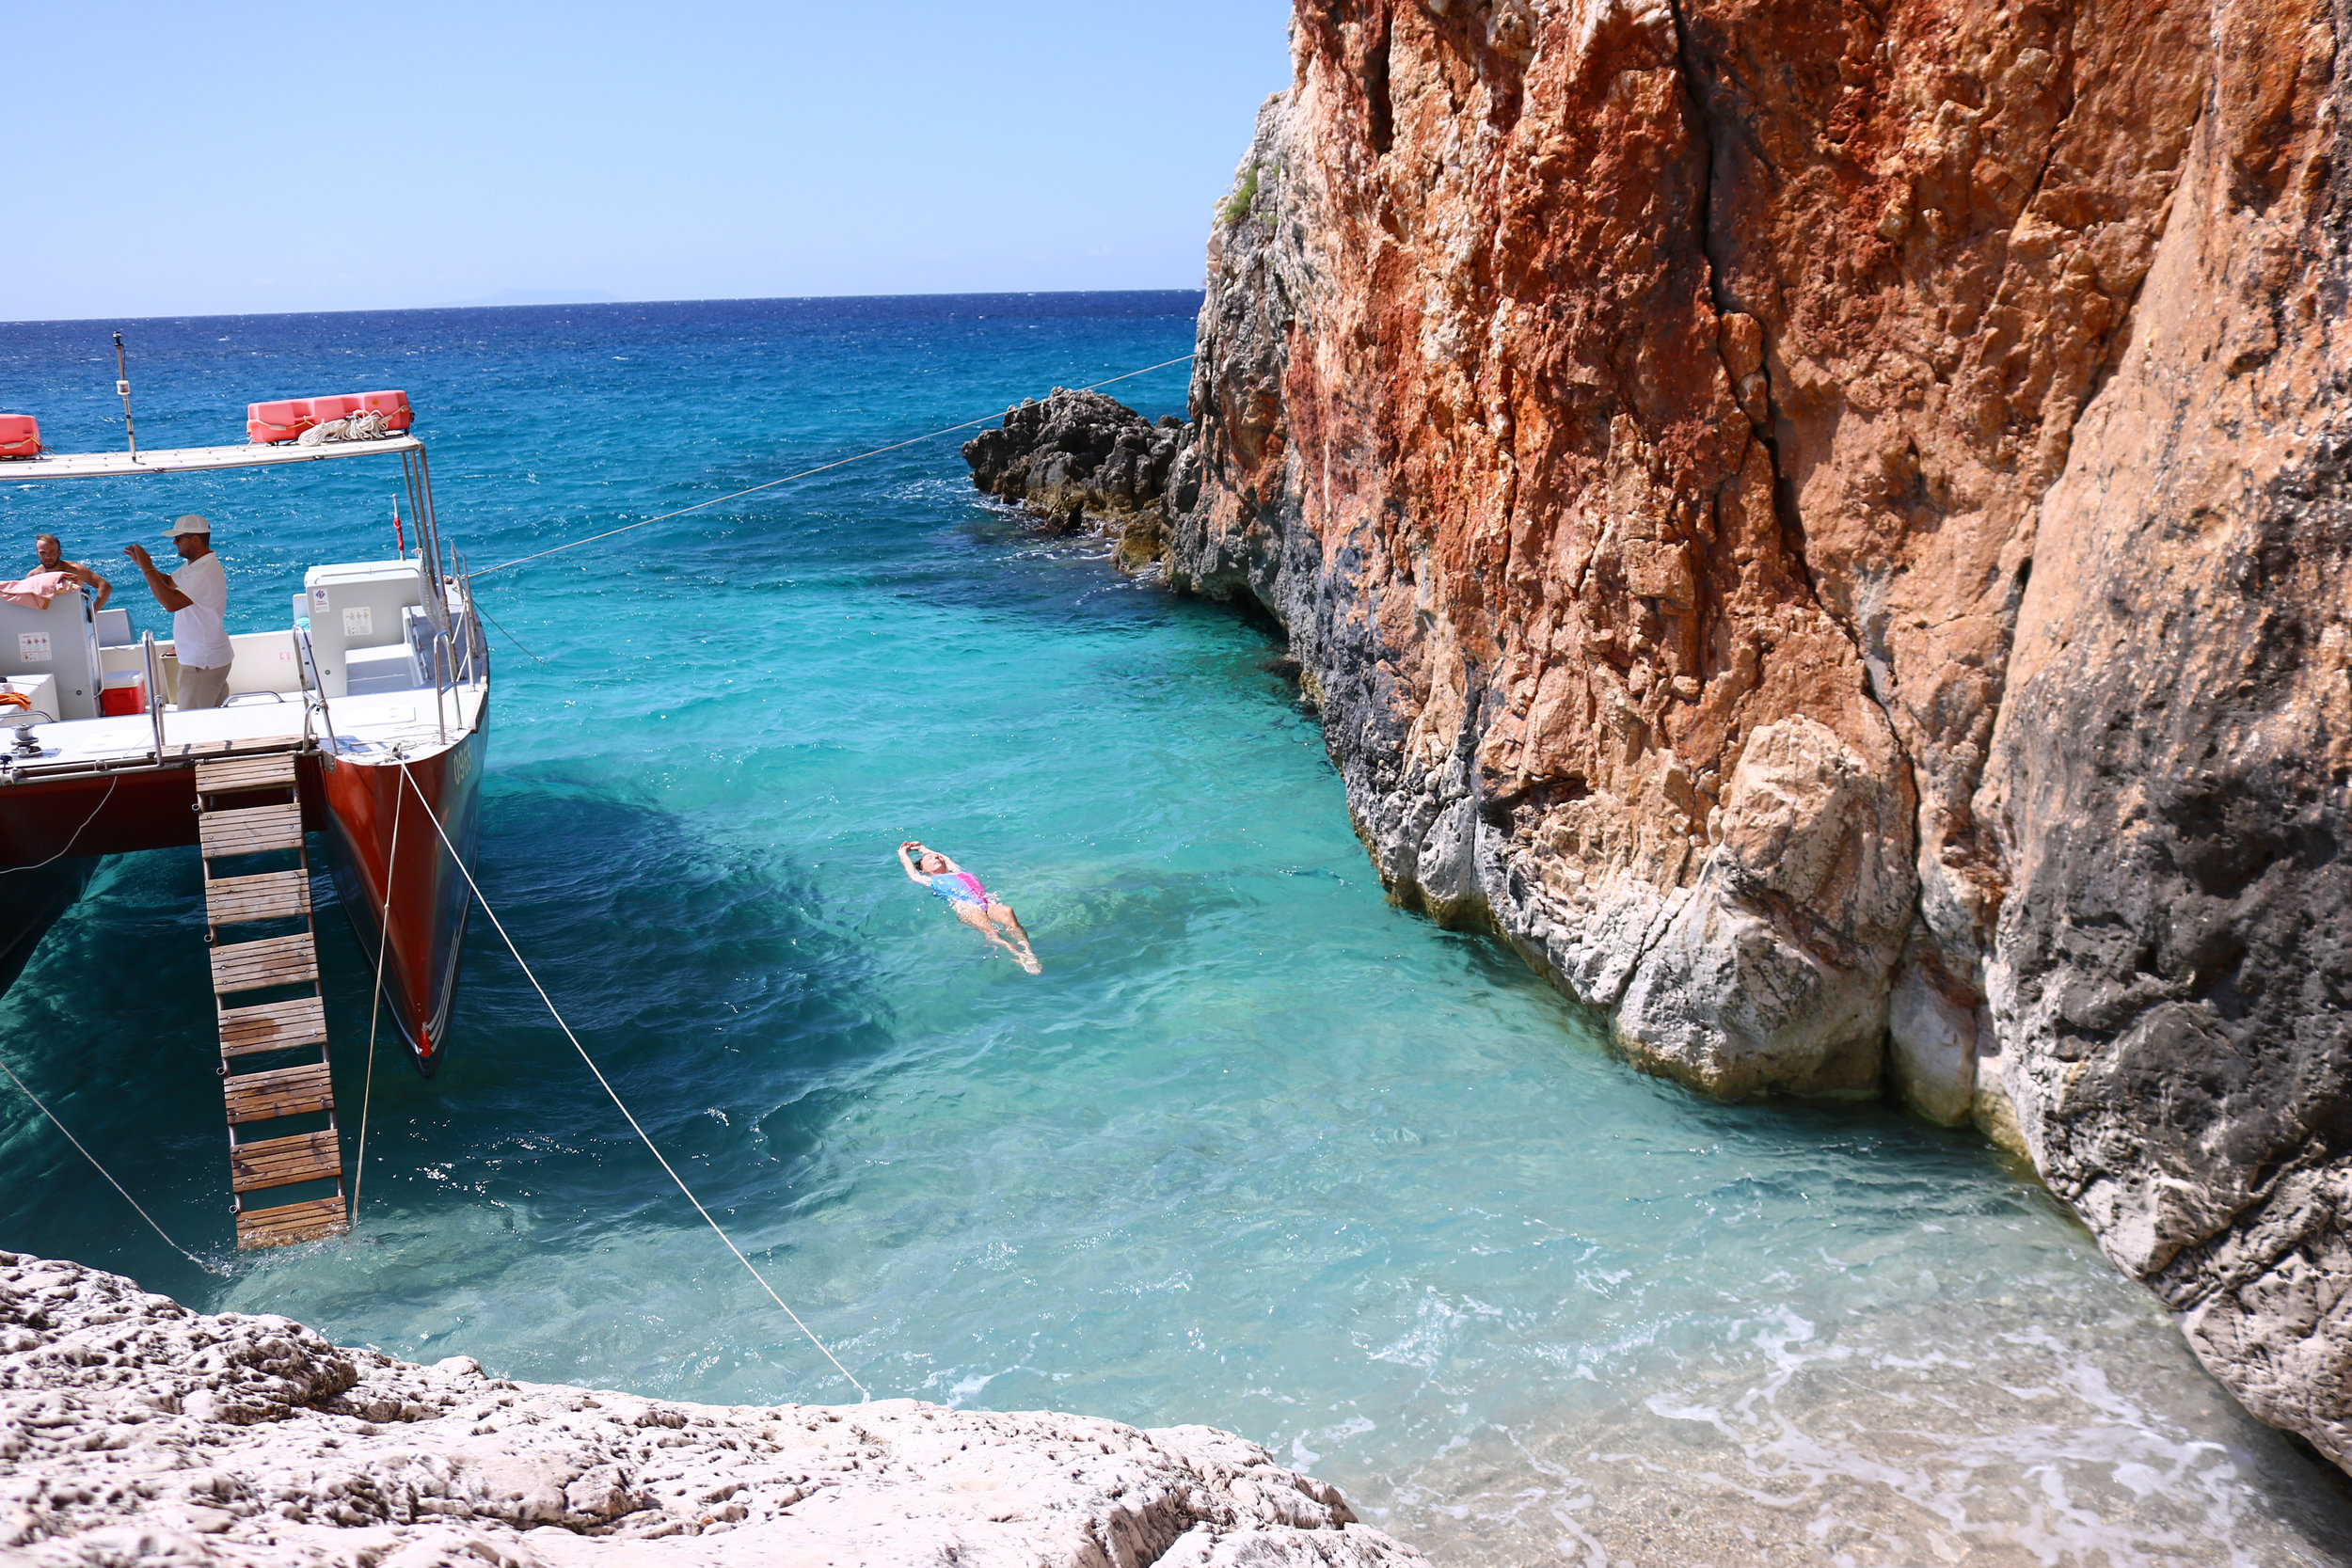 girl floating in turquoise water next to a boat with red cliffs right next to her